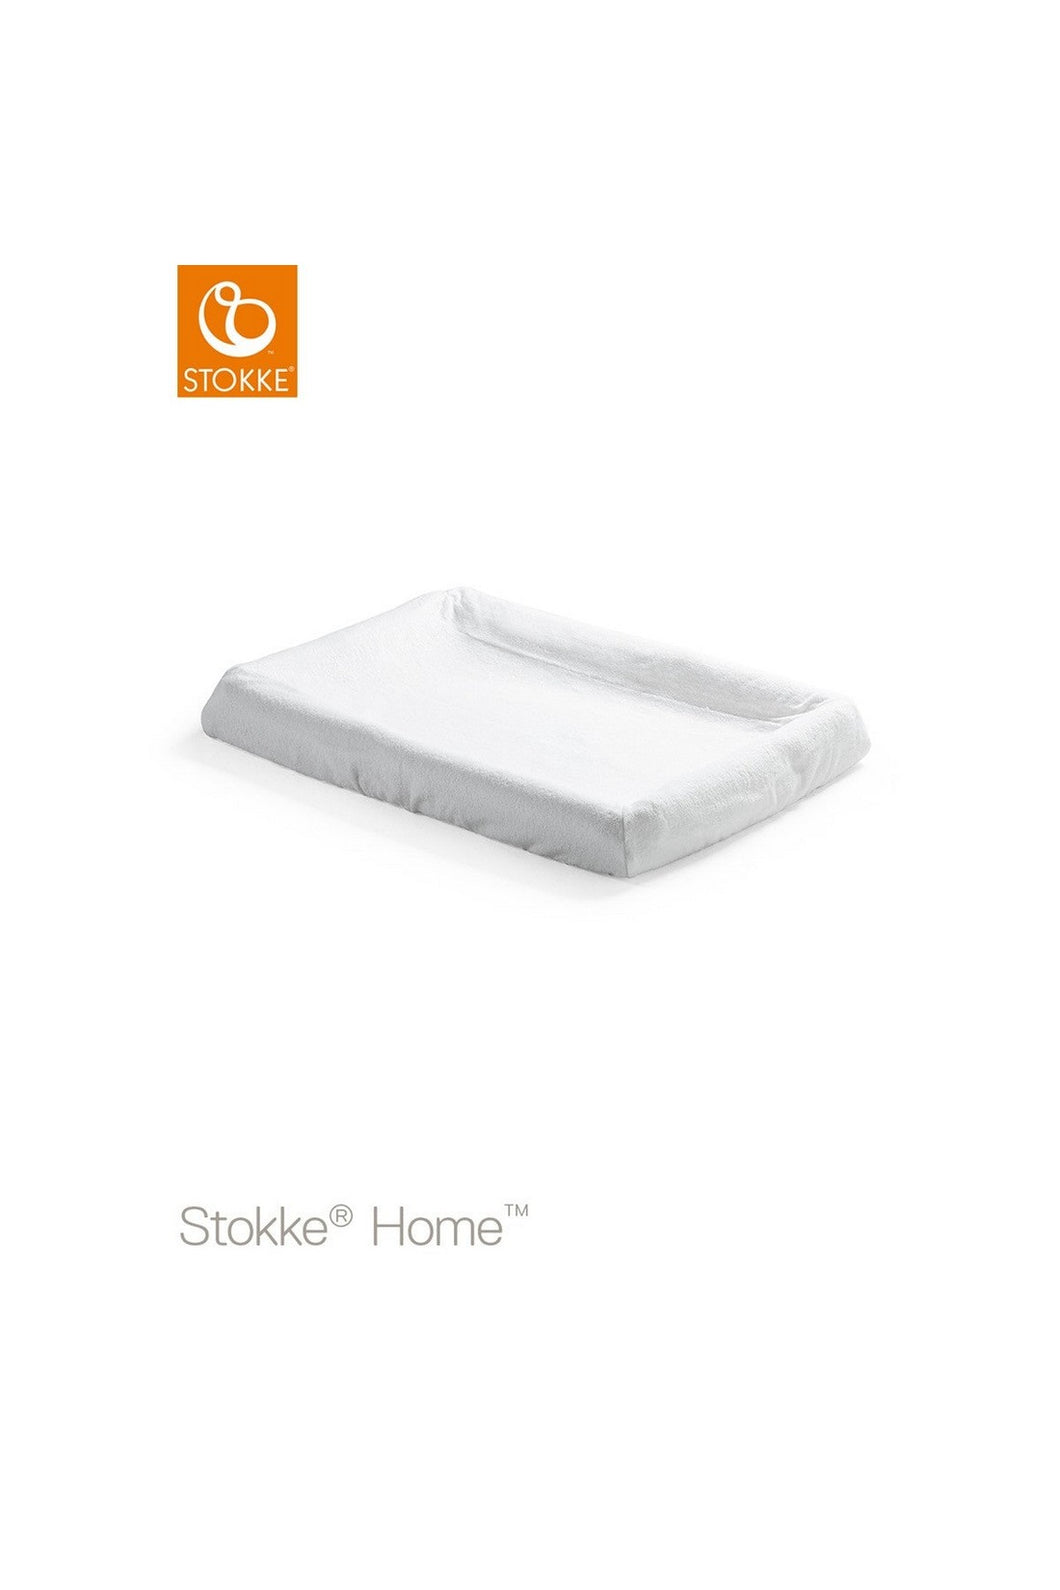 Stokke Home Top Changer Cover